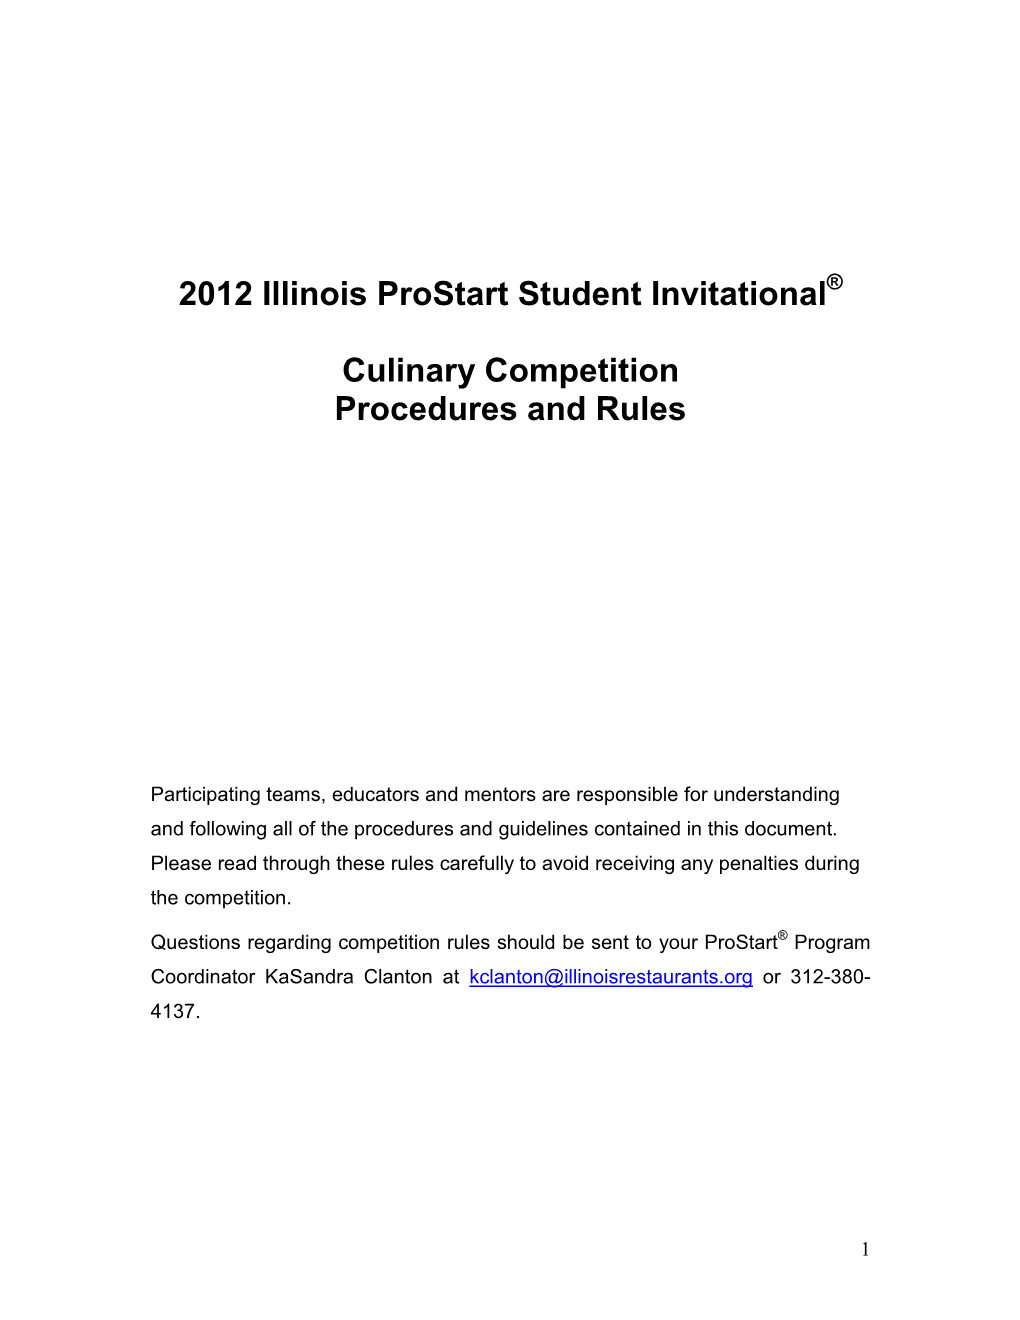 Culinary Competition Procedures and Rules